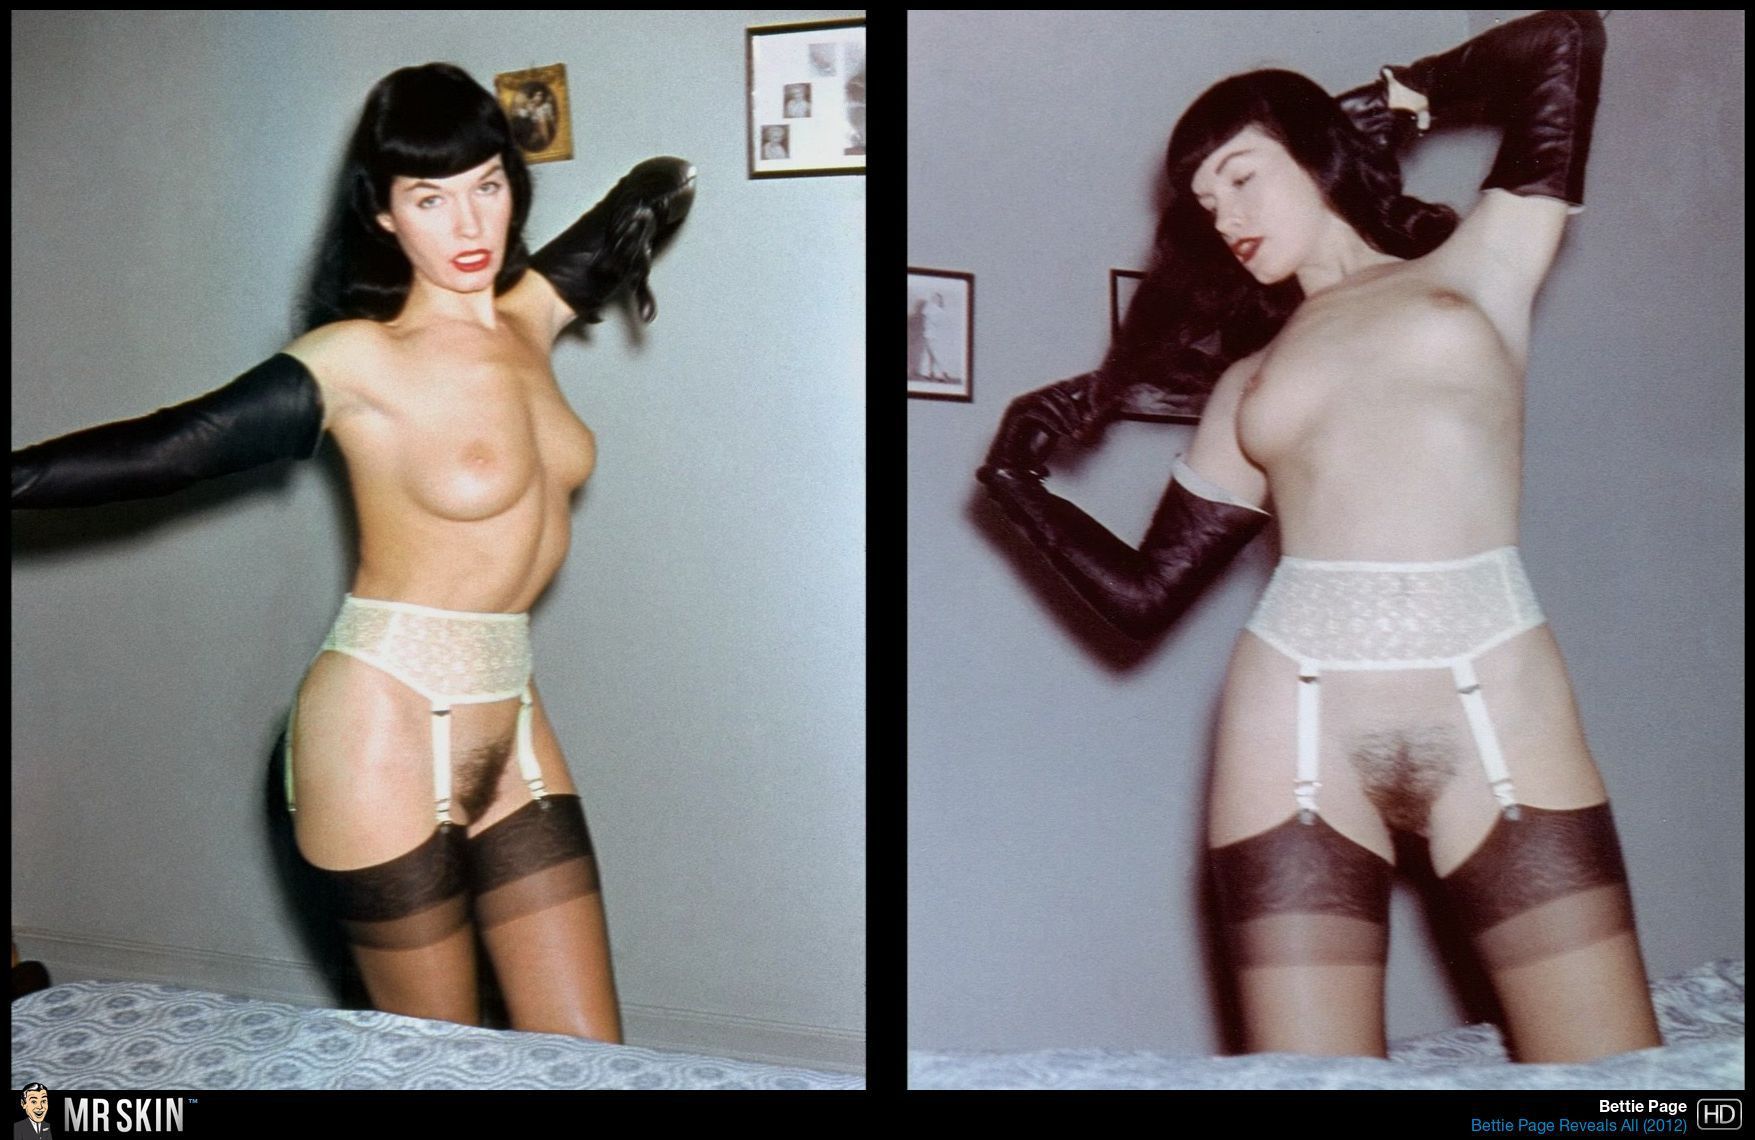 Betty Page Porn Uncensored - The Notorious Bettie Page - Free Sex Images, Best XXX Pics and Hot Porn  Photos on www.nicesex.net